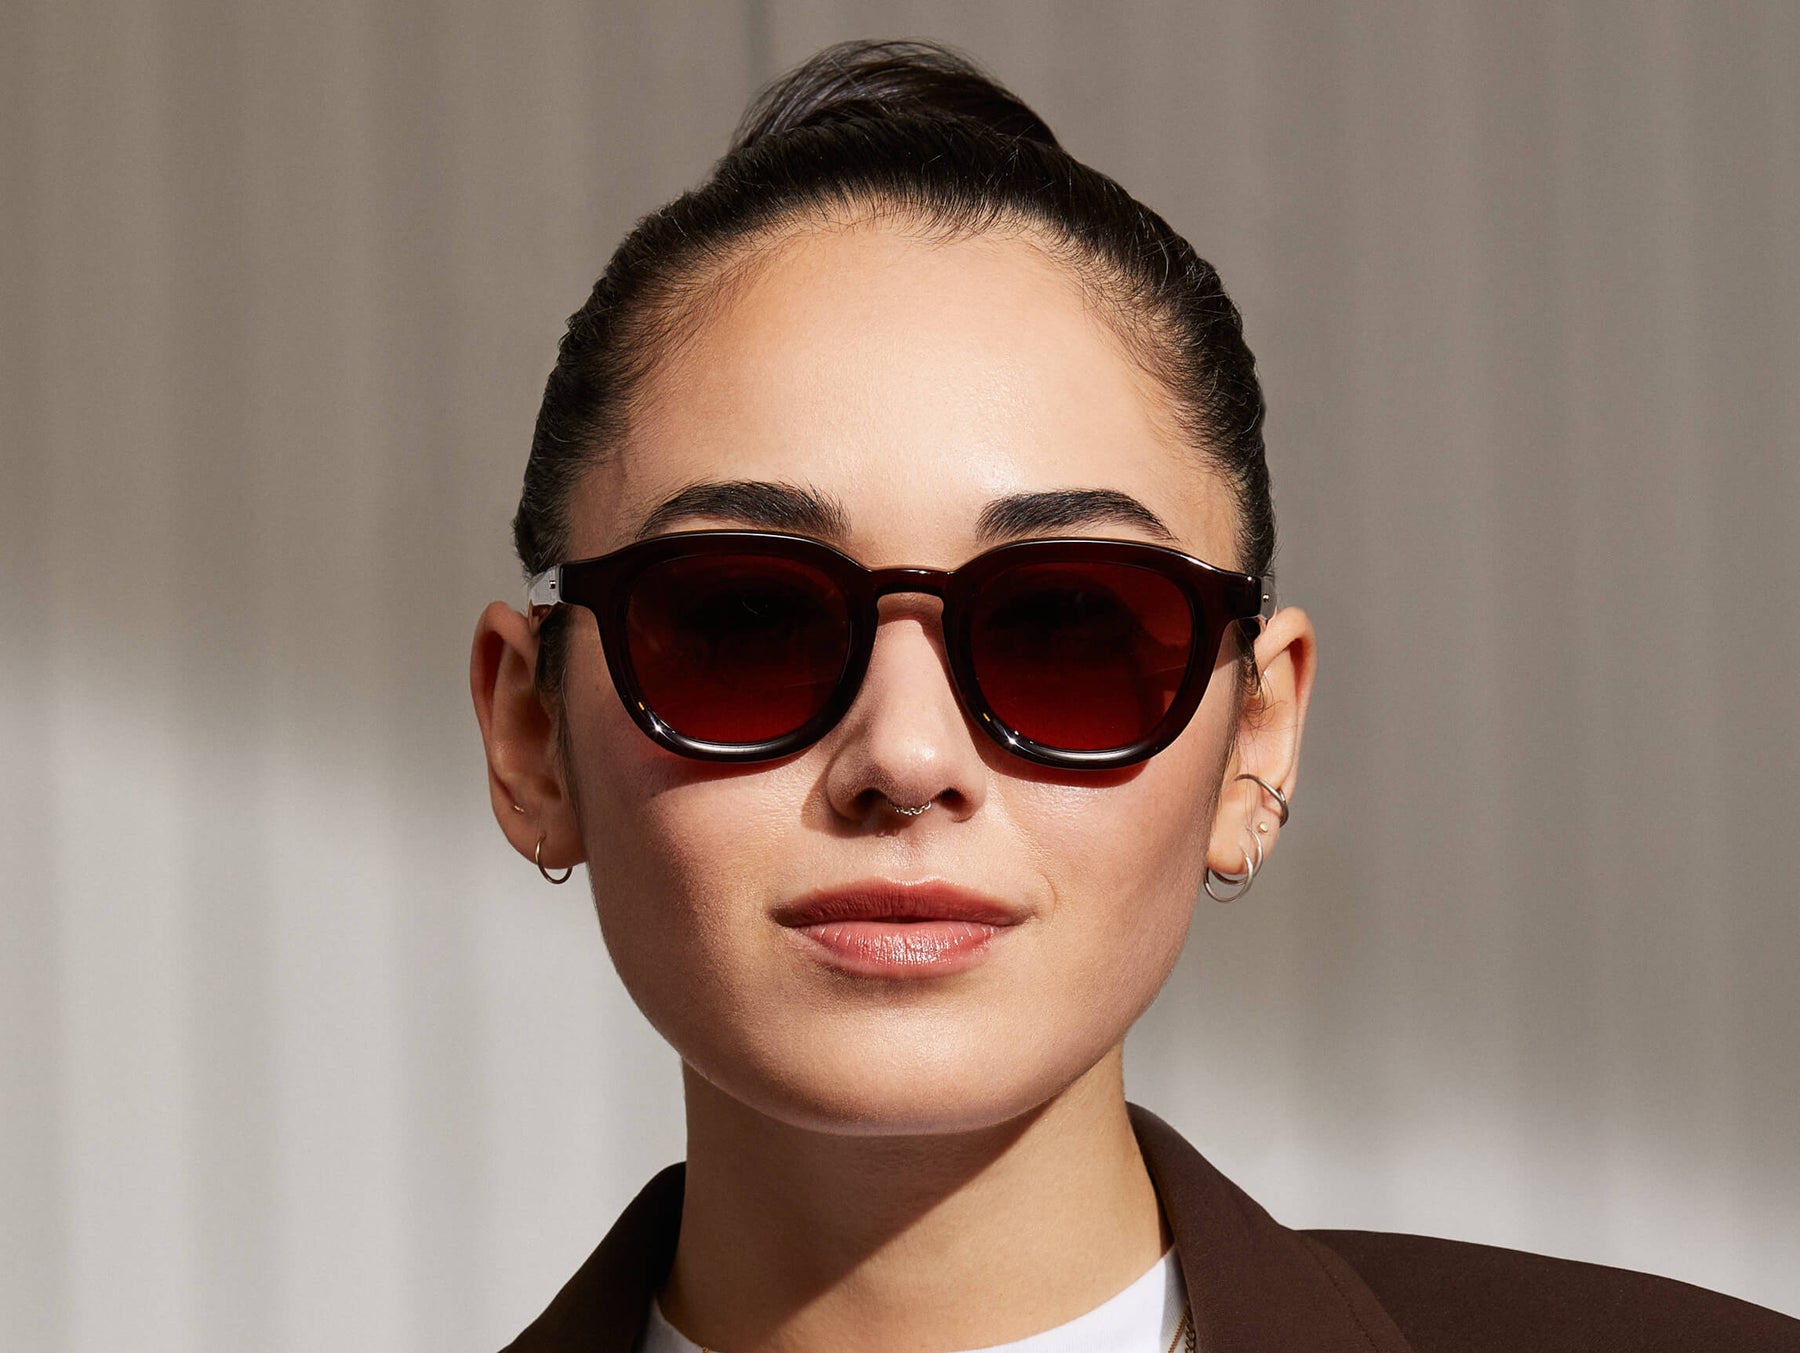 Model is wearing The DAHVEN SUN in Burgundy in size 44 with Cabernet Tinted Lenses